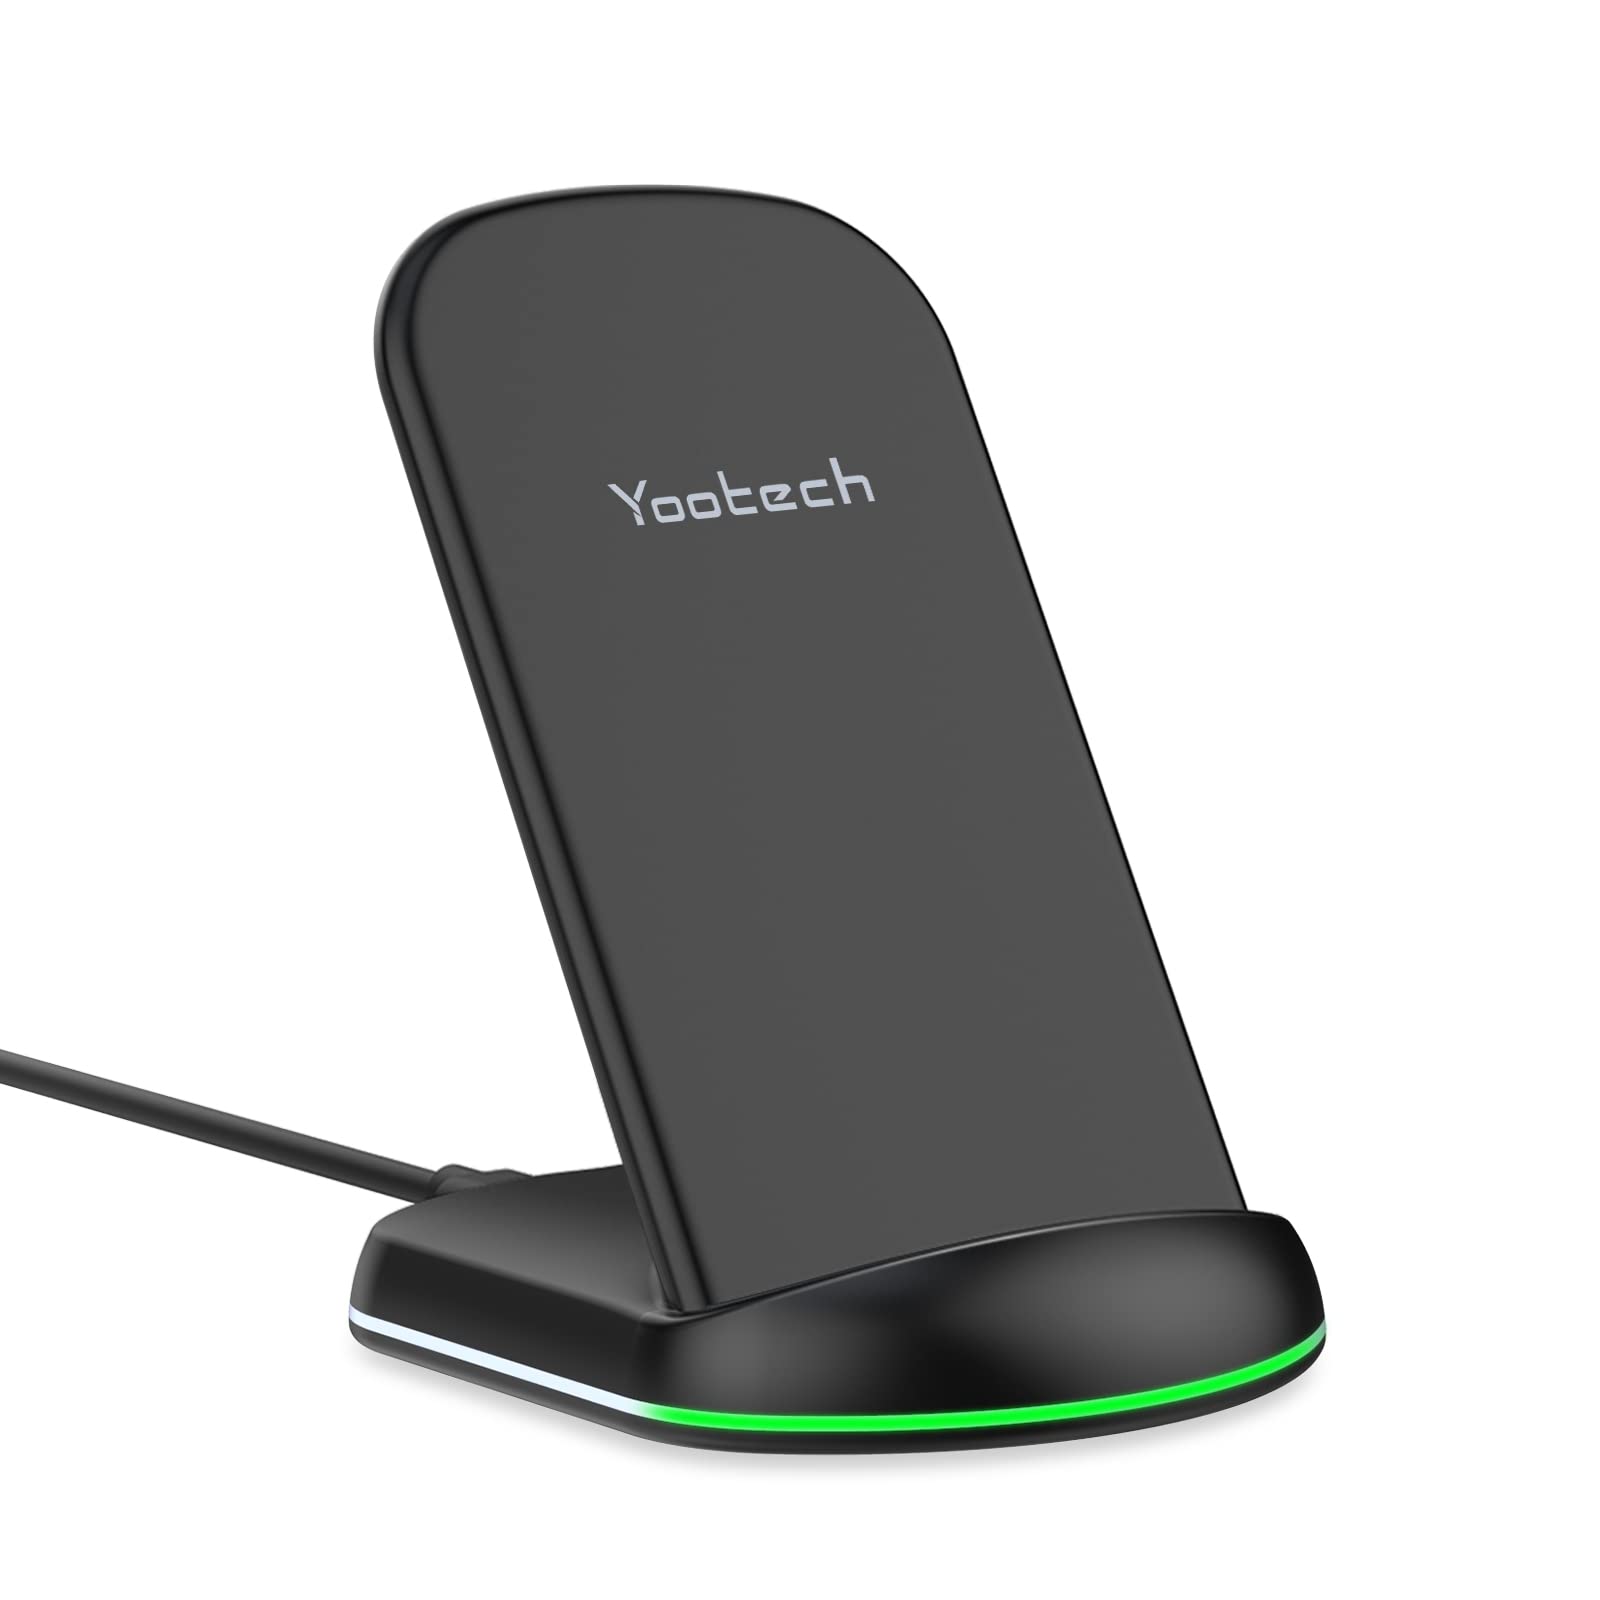 Book Cover Yootech Wireless Charger Qi-Certified 10W Max Wireless Charging Stand, Compatible with iPhone 11/11 Pro/11 Pro Max/Xs MAX/XR/XS/X/8, Galaxy Note 10/Note 10 Plus/S10/S10 Plus/S10E/S9(No AC Adapter)